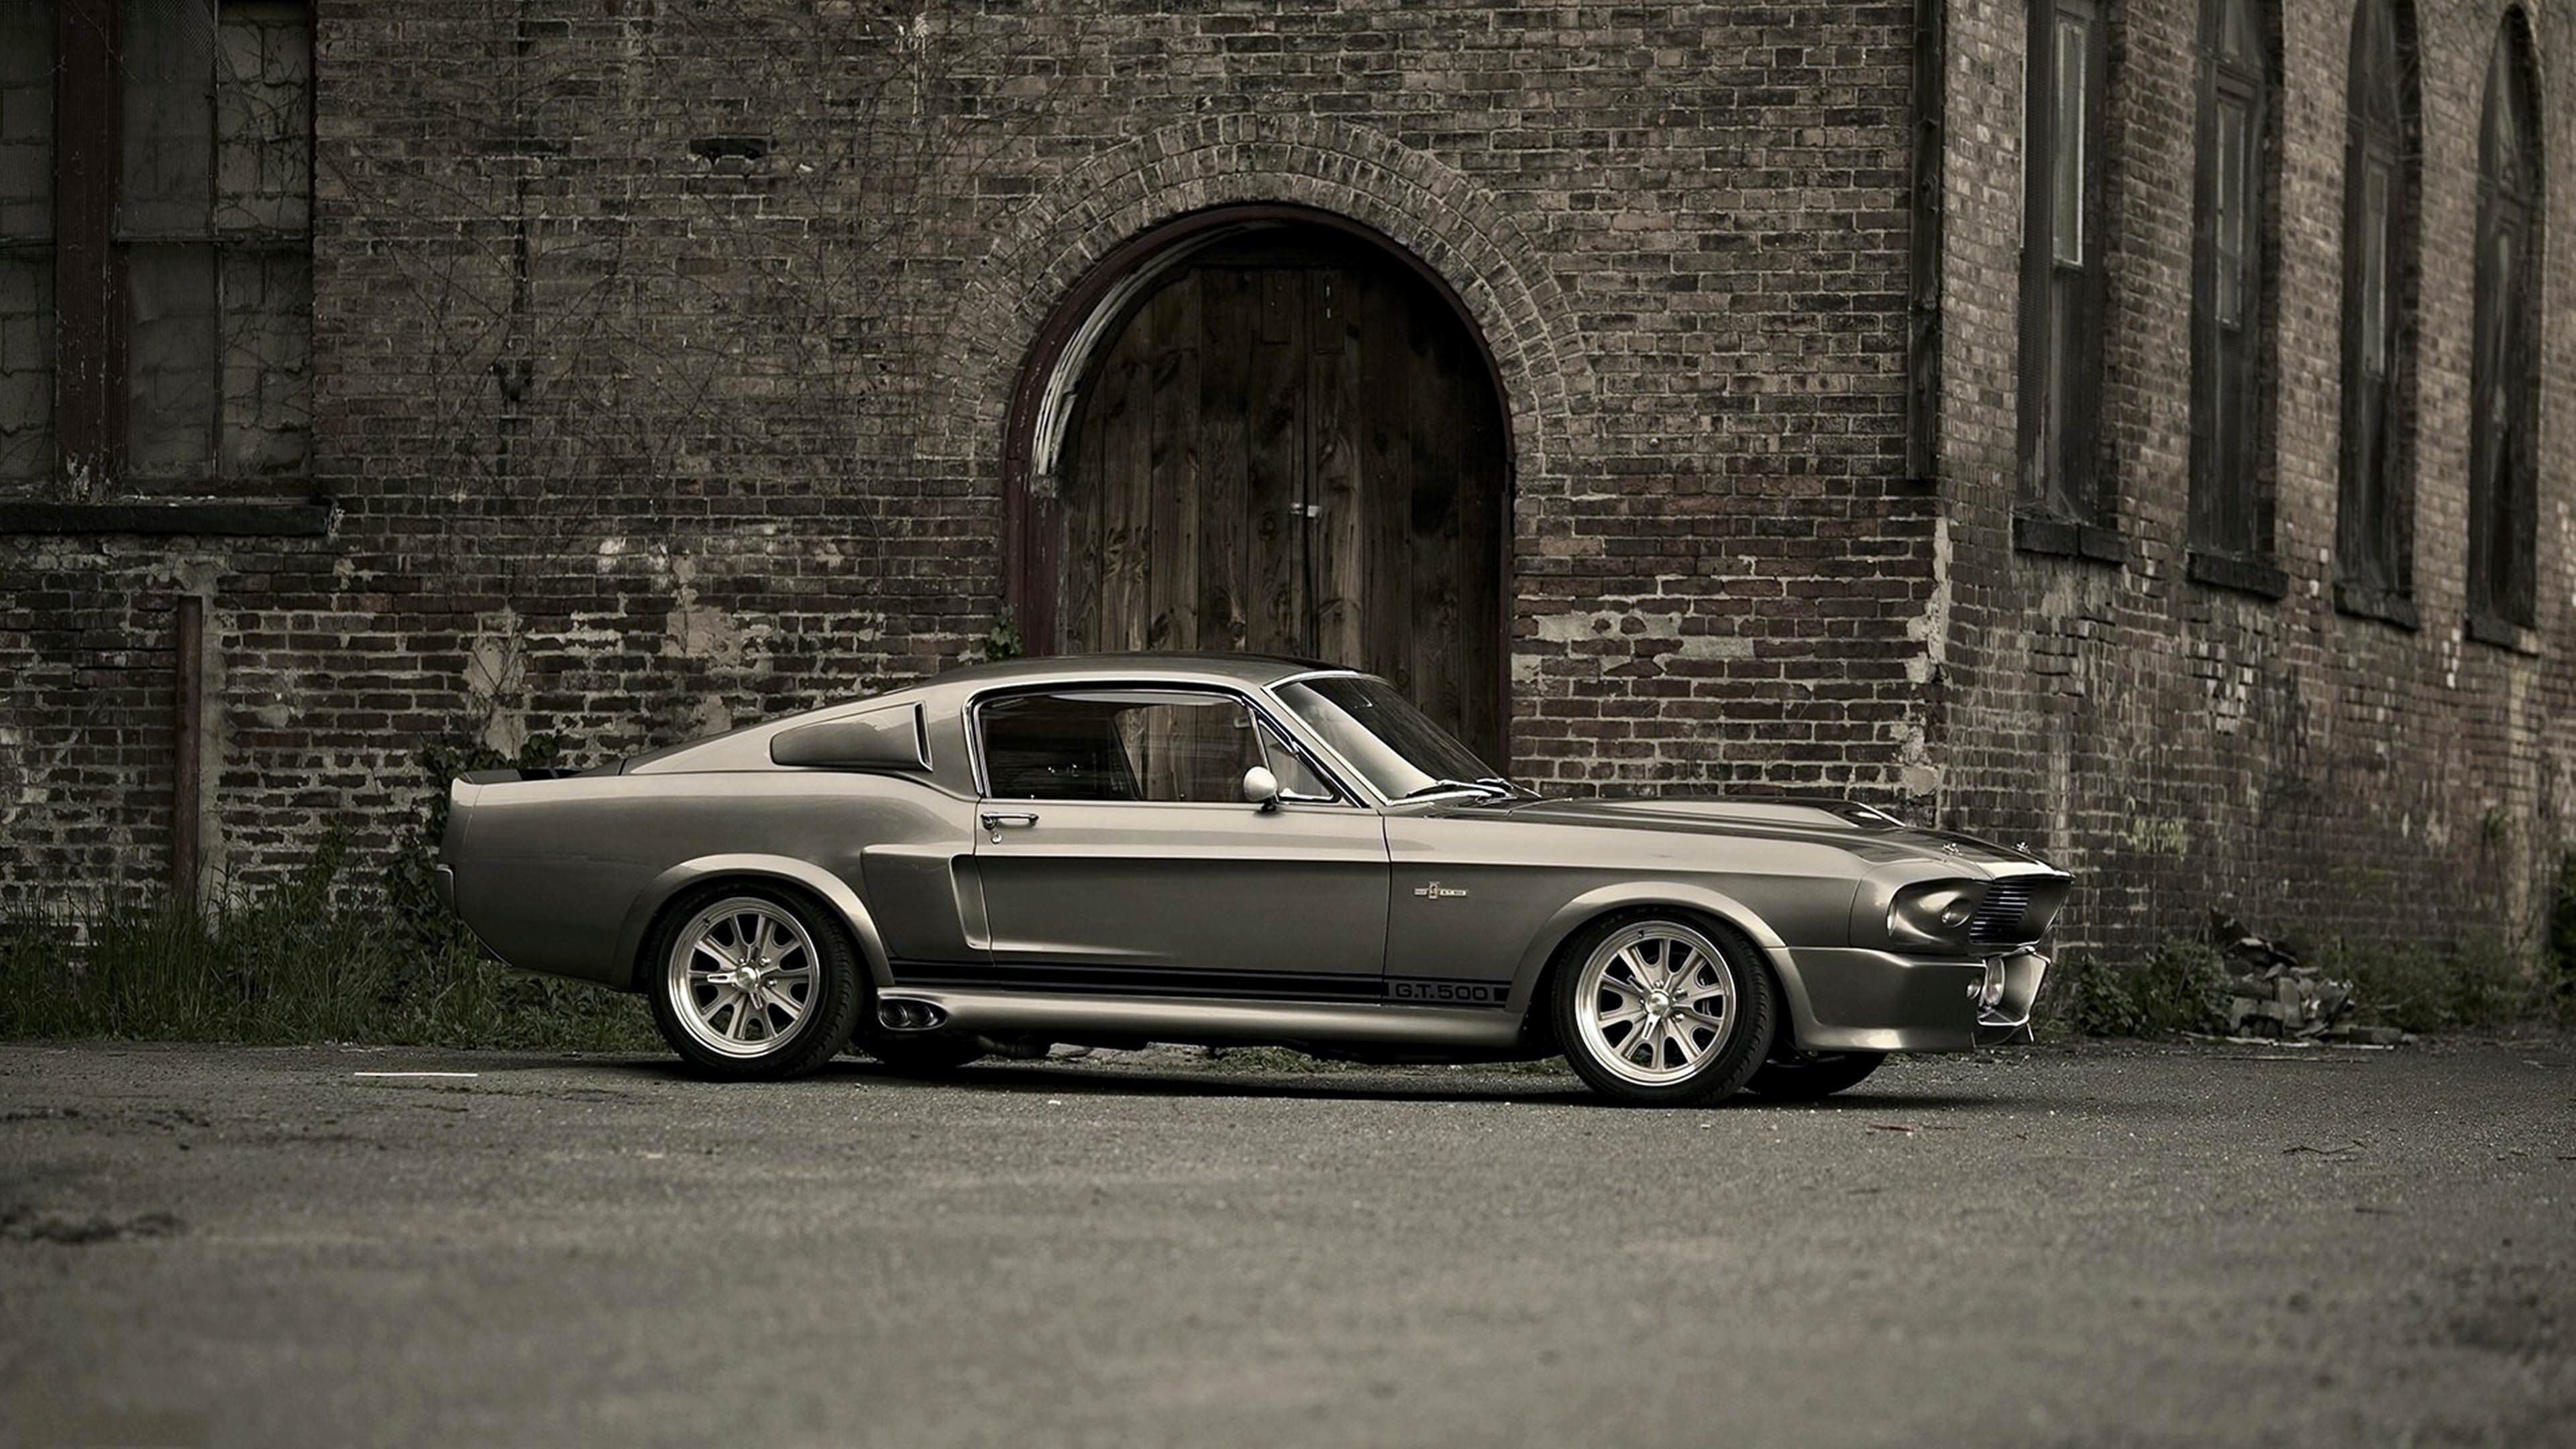 Classsic Ford Mustang Shelby GT500 Wallpaper. Car Picture